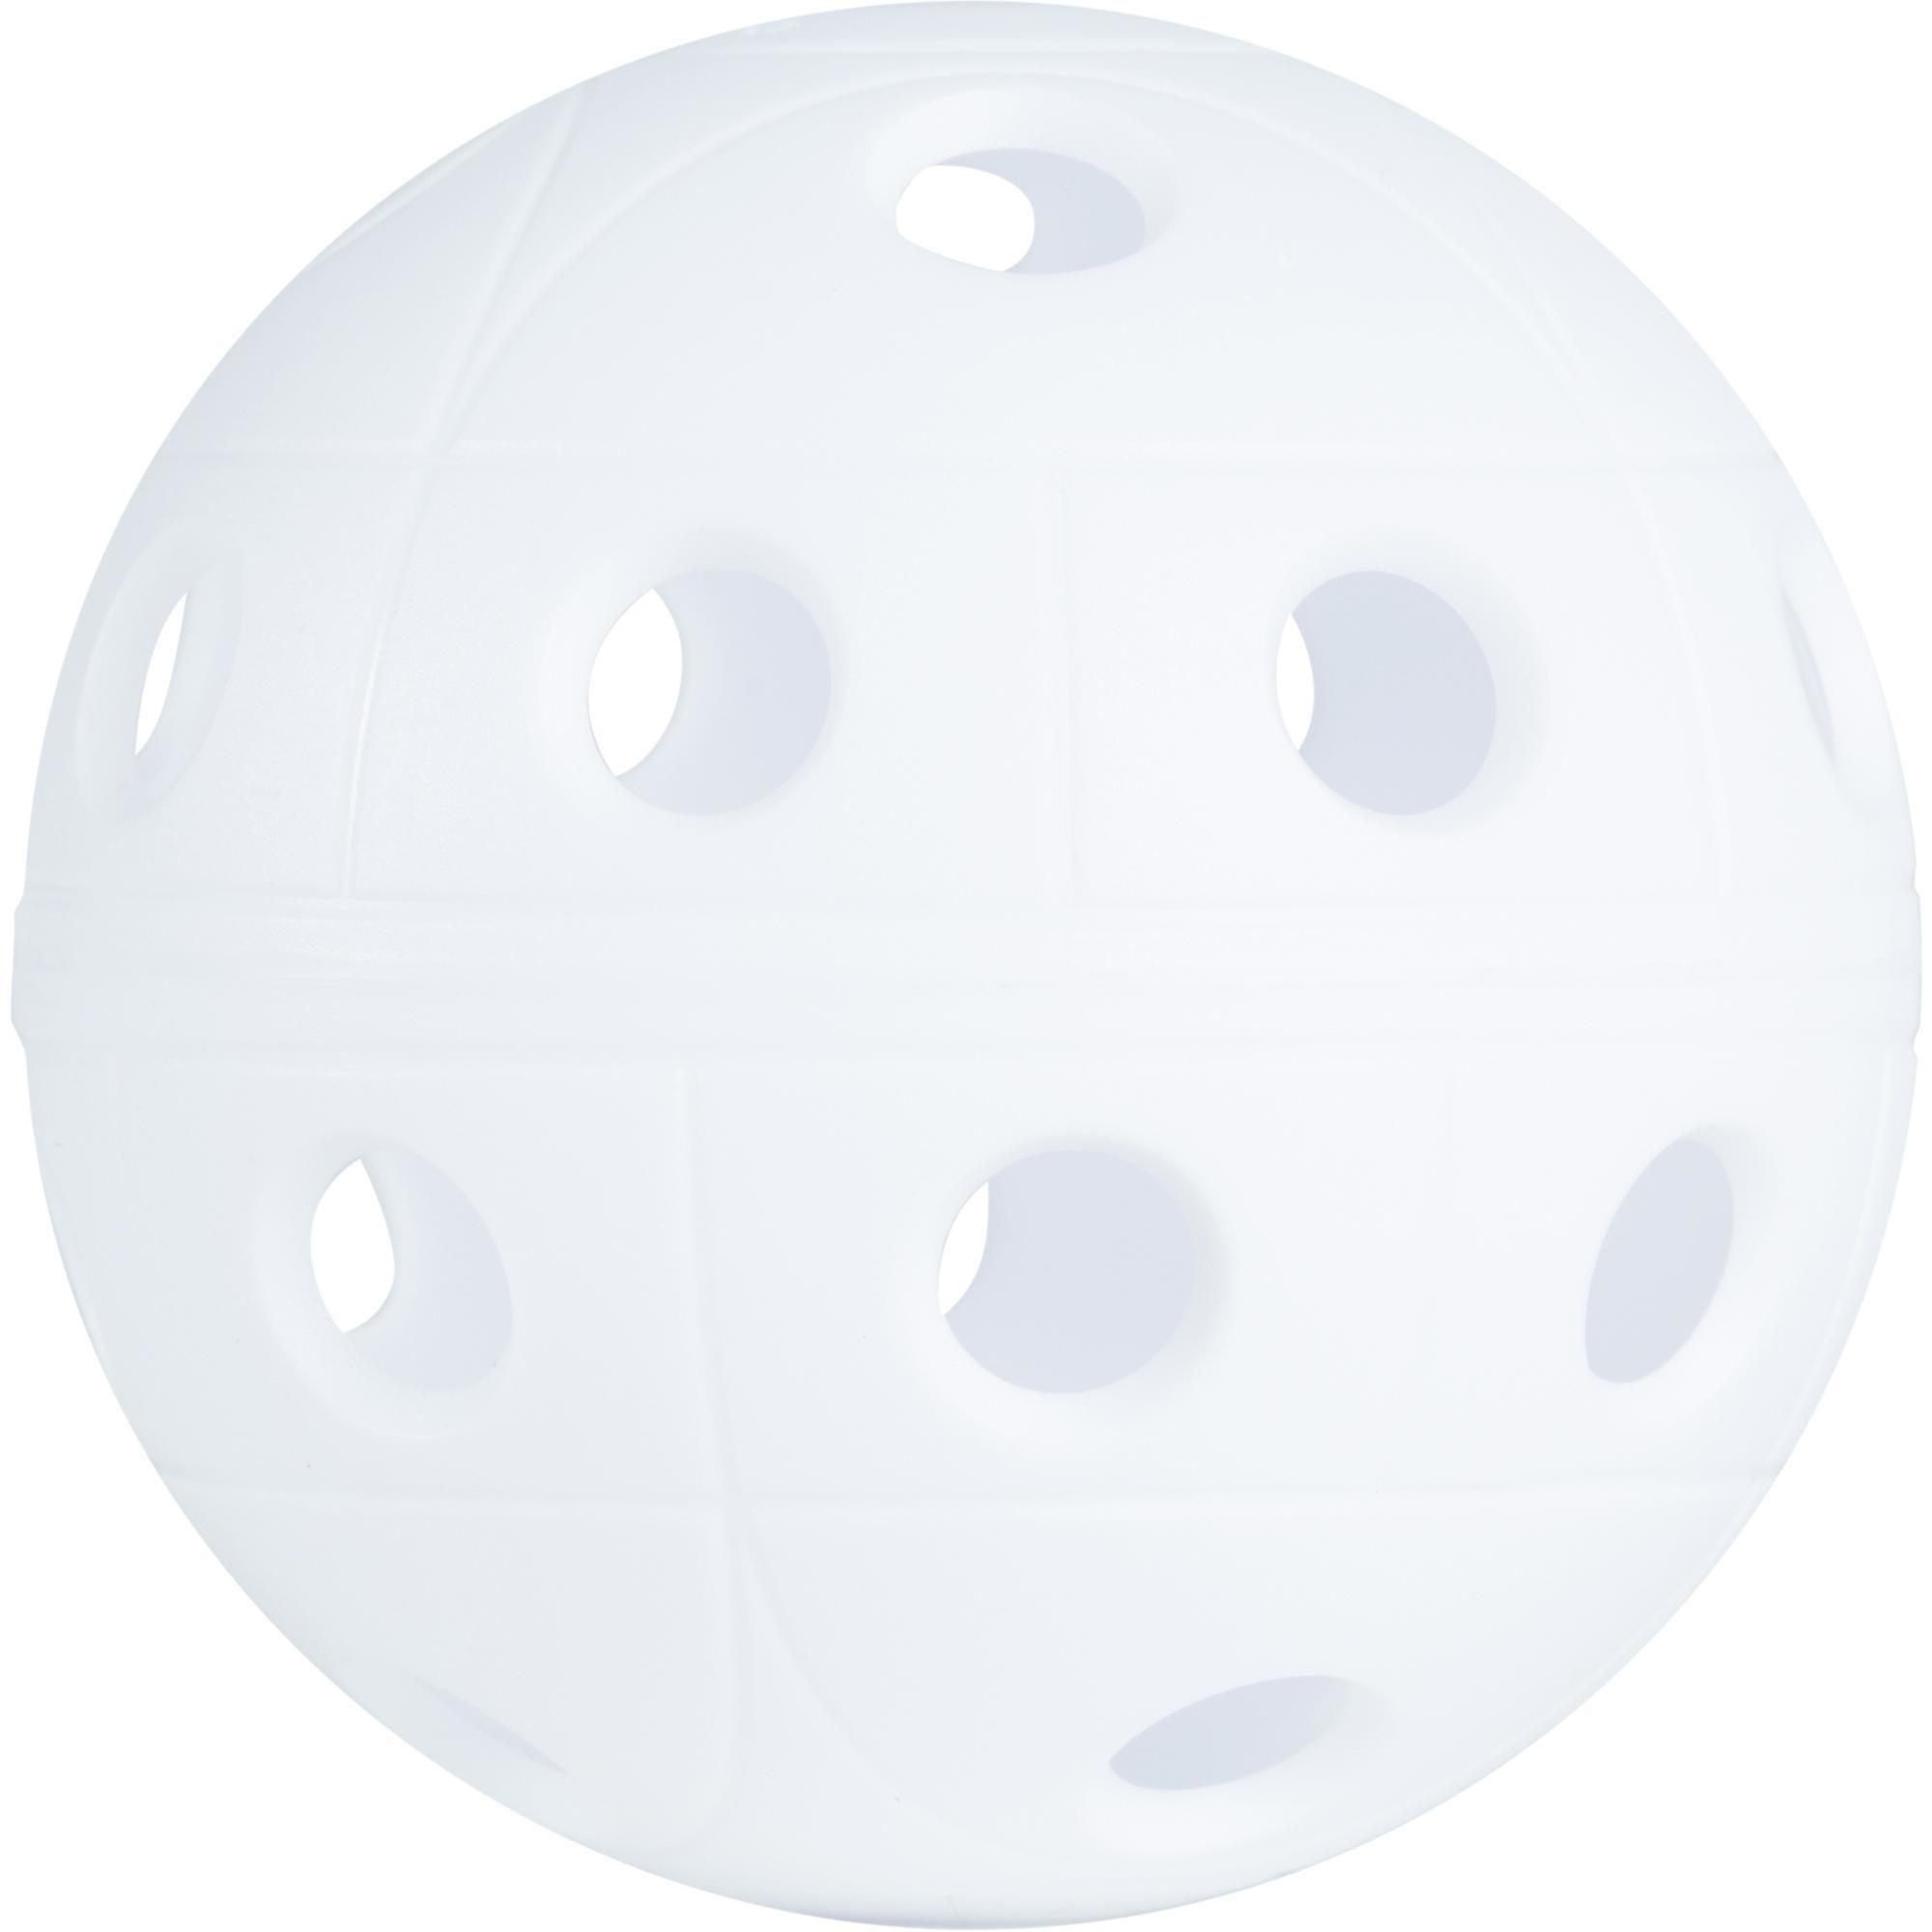 Floorball: A standard game ball that has 26 holes in it and is made with aerodynamic technology. 2000x2000 HD Background.